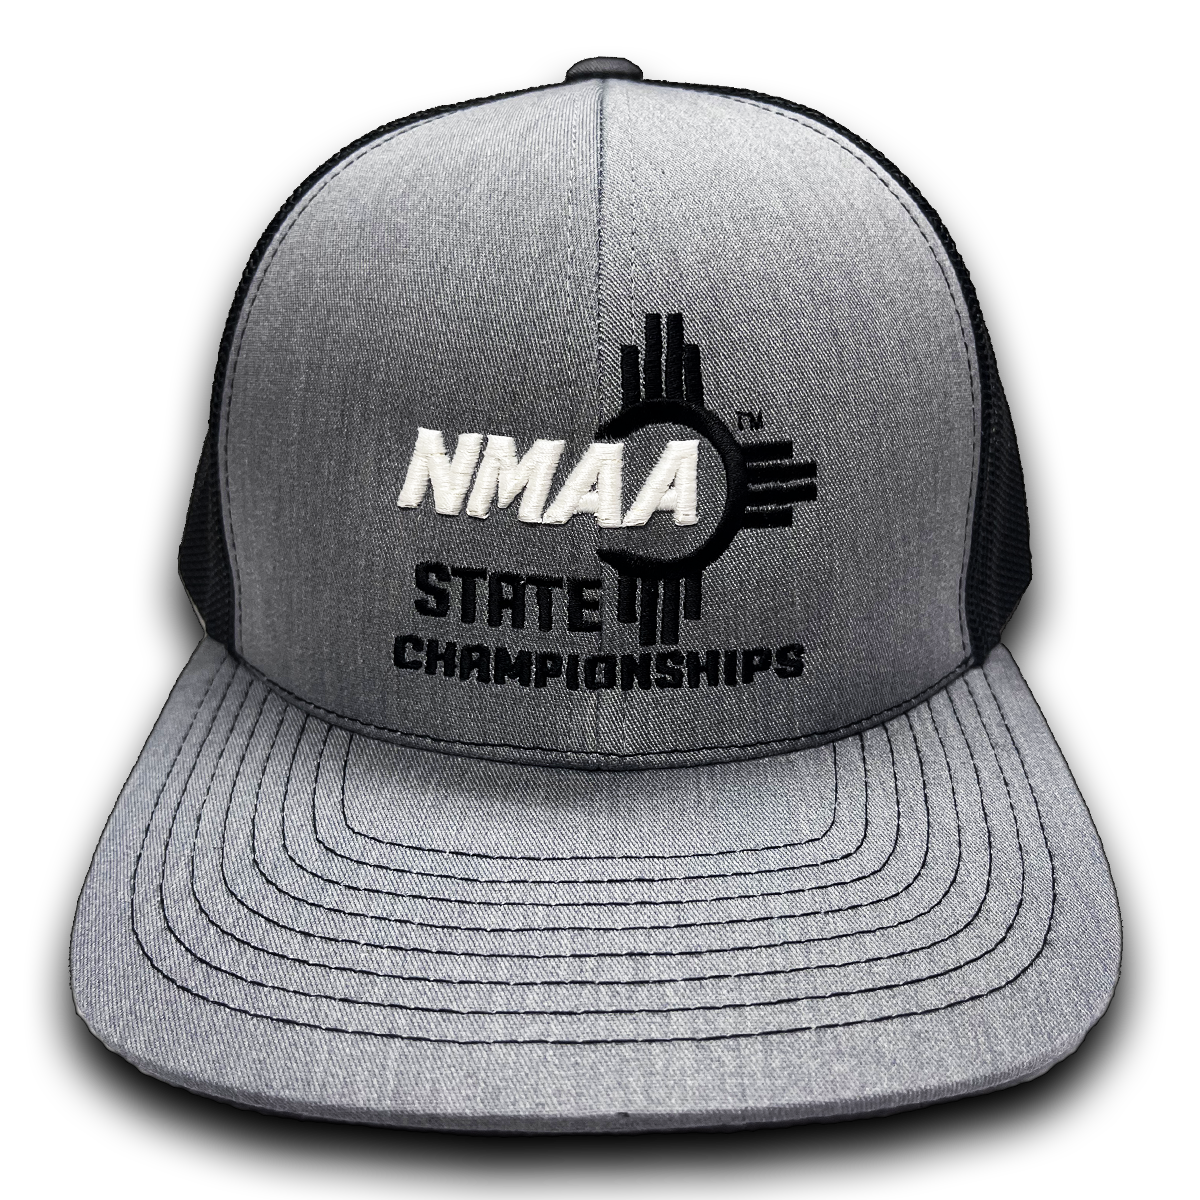 NMAA State Championship Charcoal Gray & Black Cap